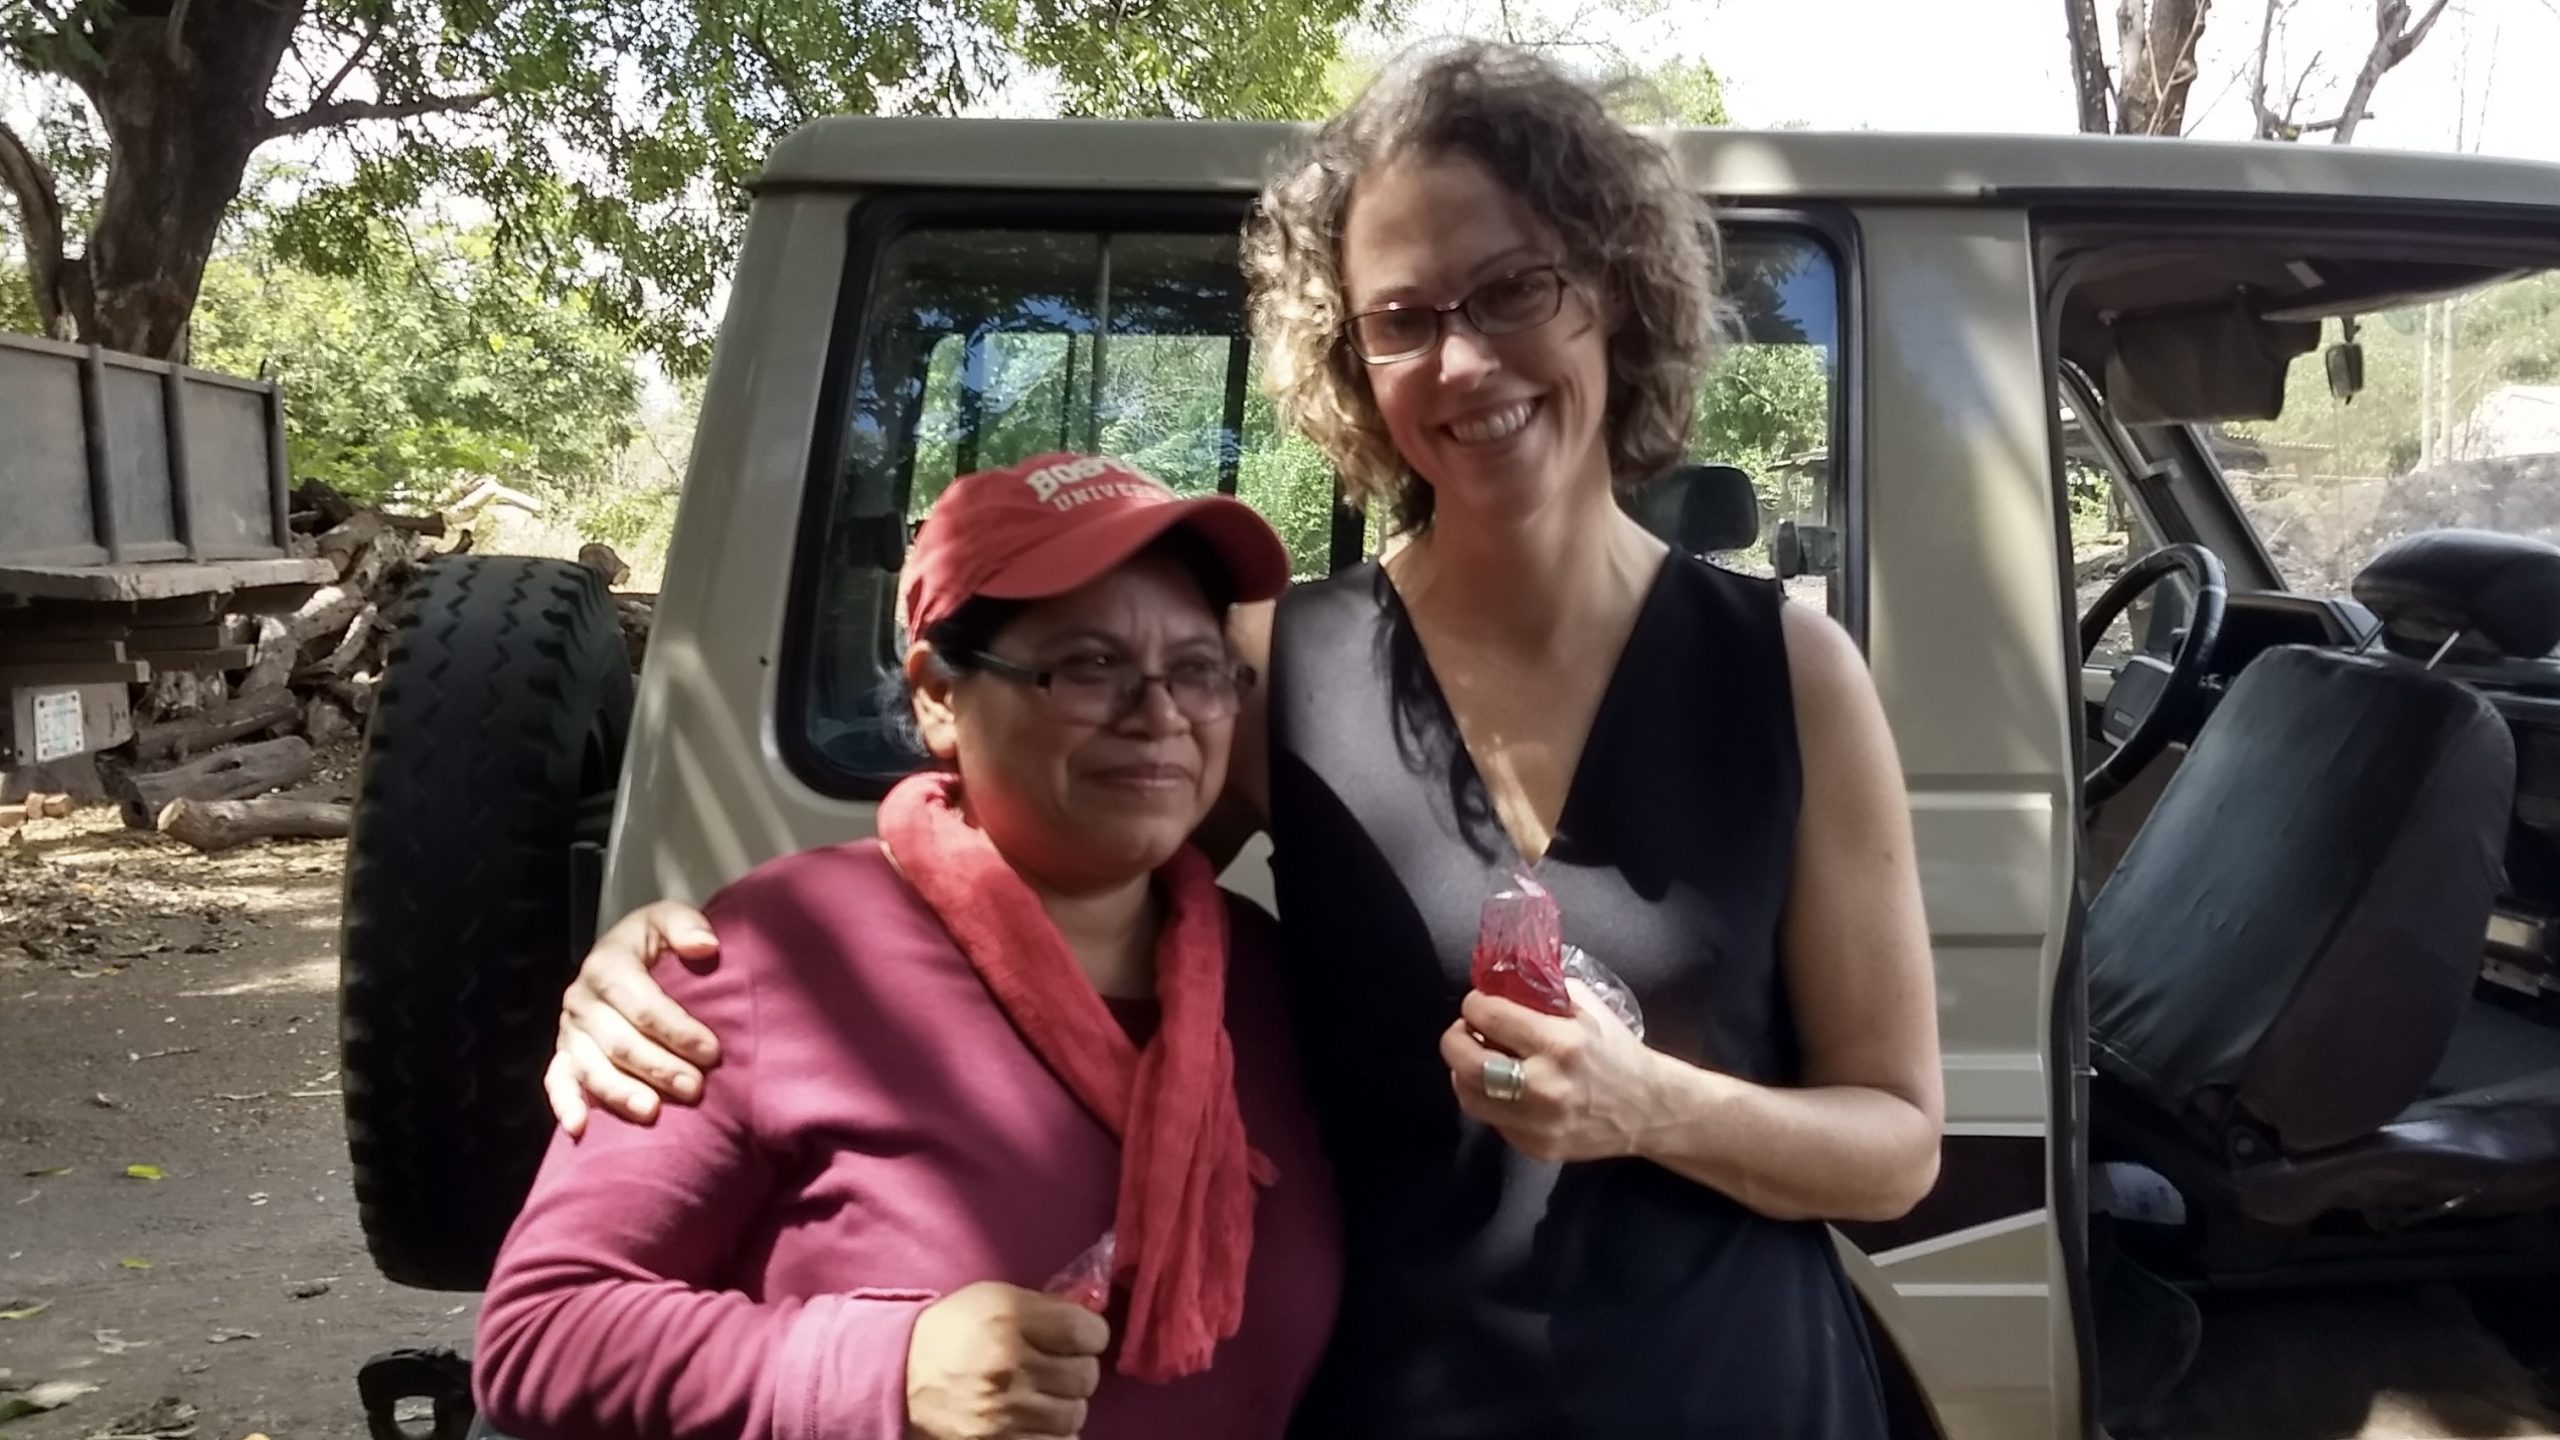 Damaris López and Dr. Scammell are standing in front of a car looking at the camera and smiling.